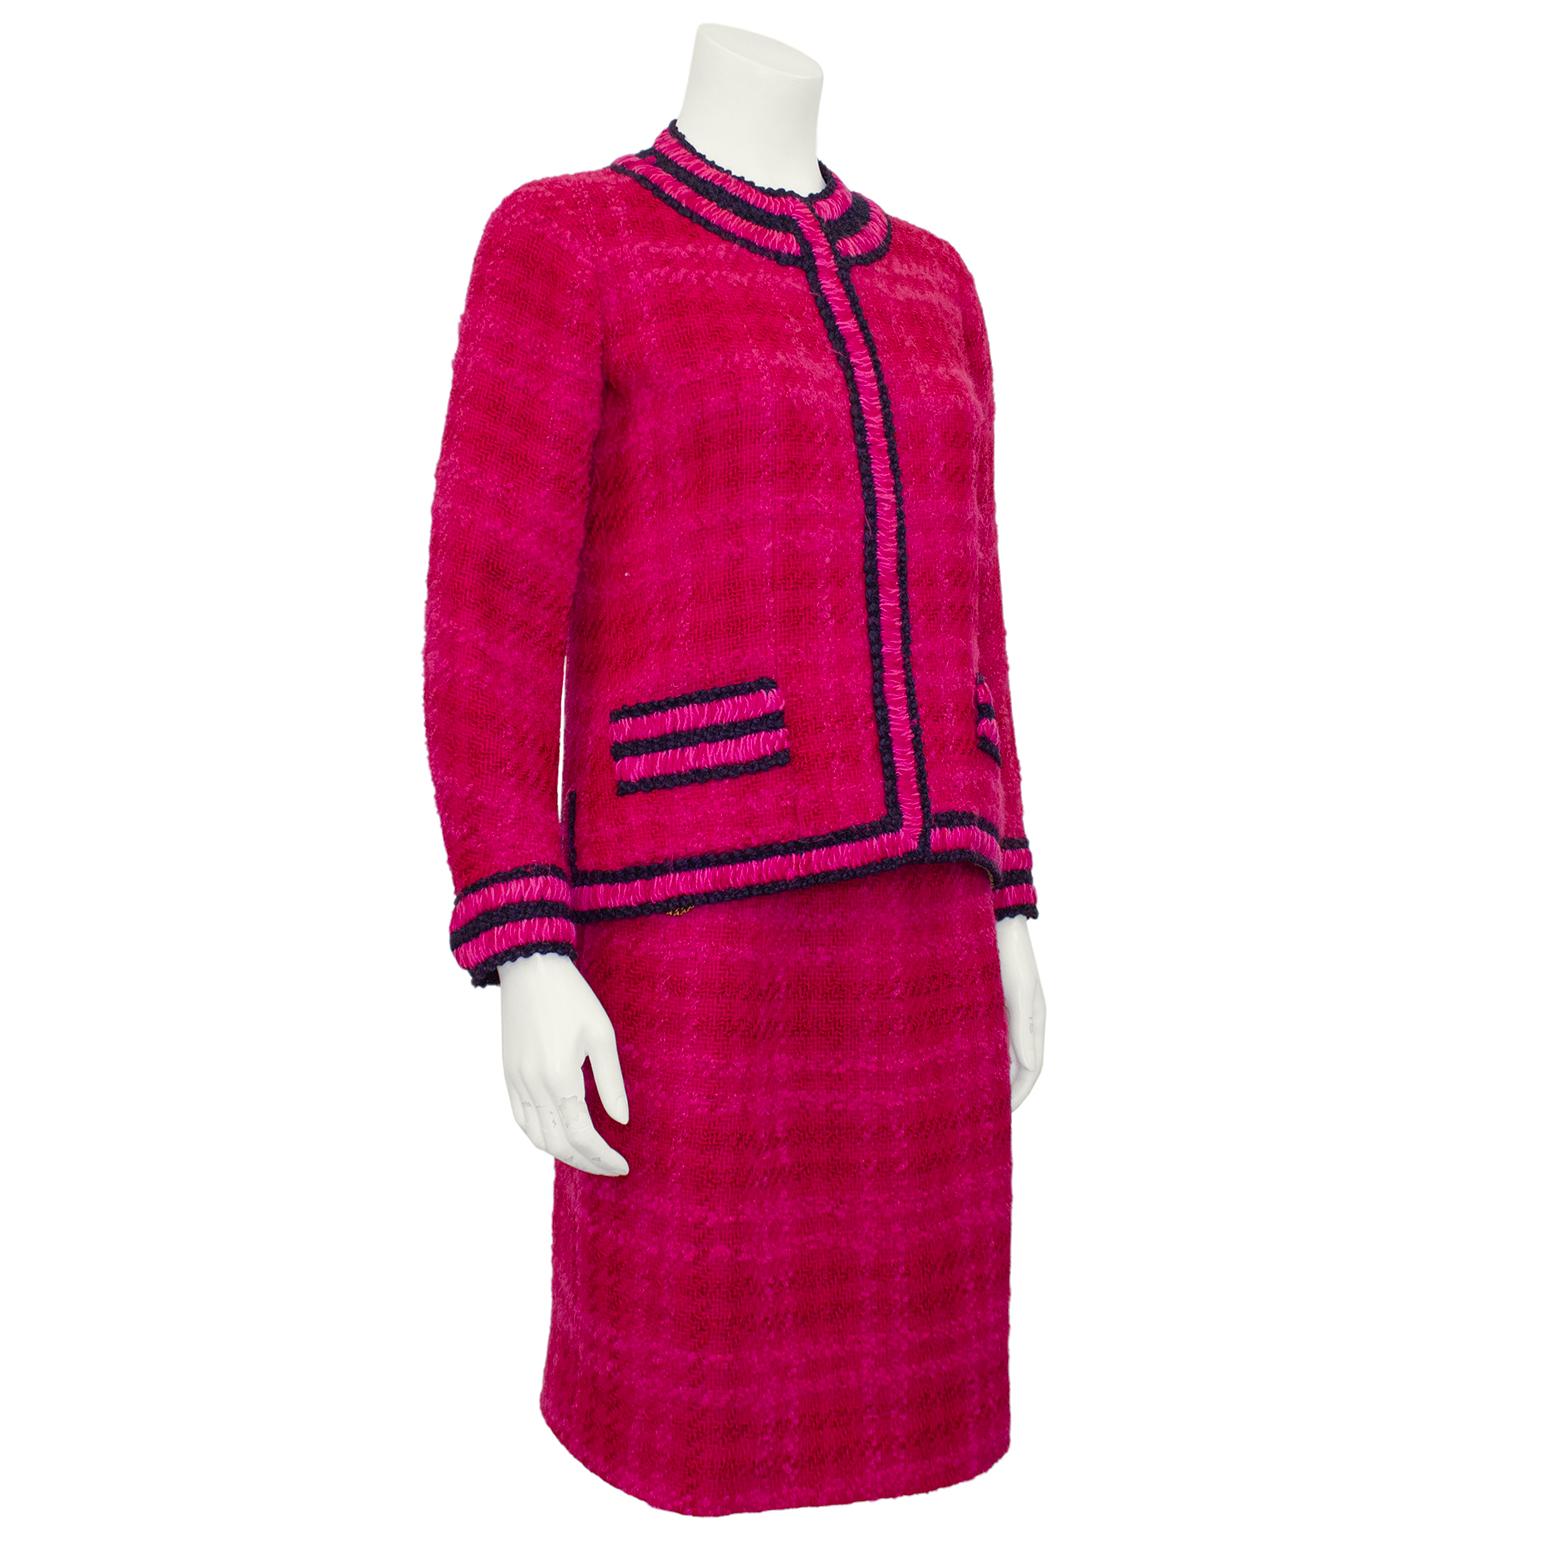 Magnificent Chanel Haute Couture skirt suit from the 1960s. From the estate of an avid Chanel Couture collector, this suit is truly special. Thick wool magenta with a faint fuchsia all over plaid. The jacket is trimmed in navy blue and fuchsia.